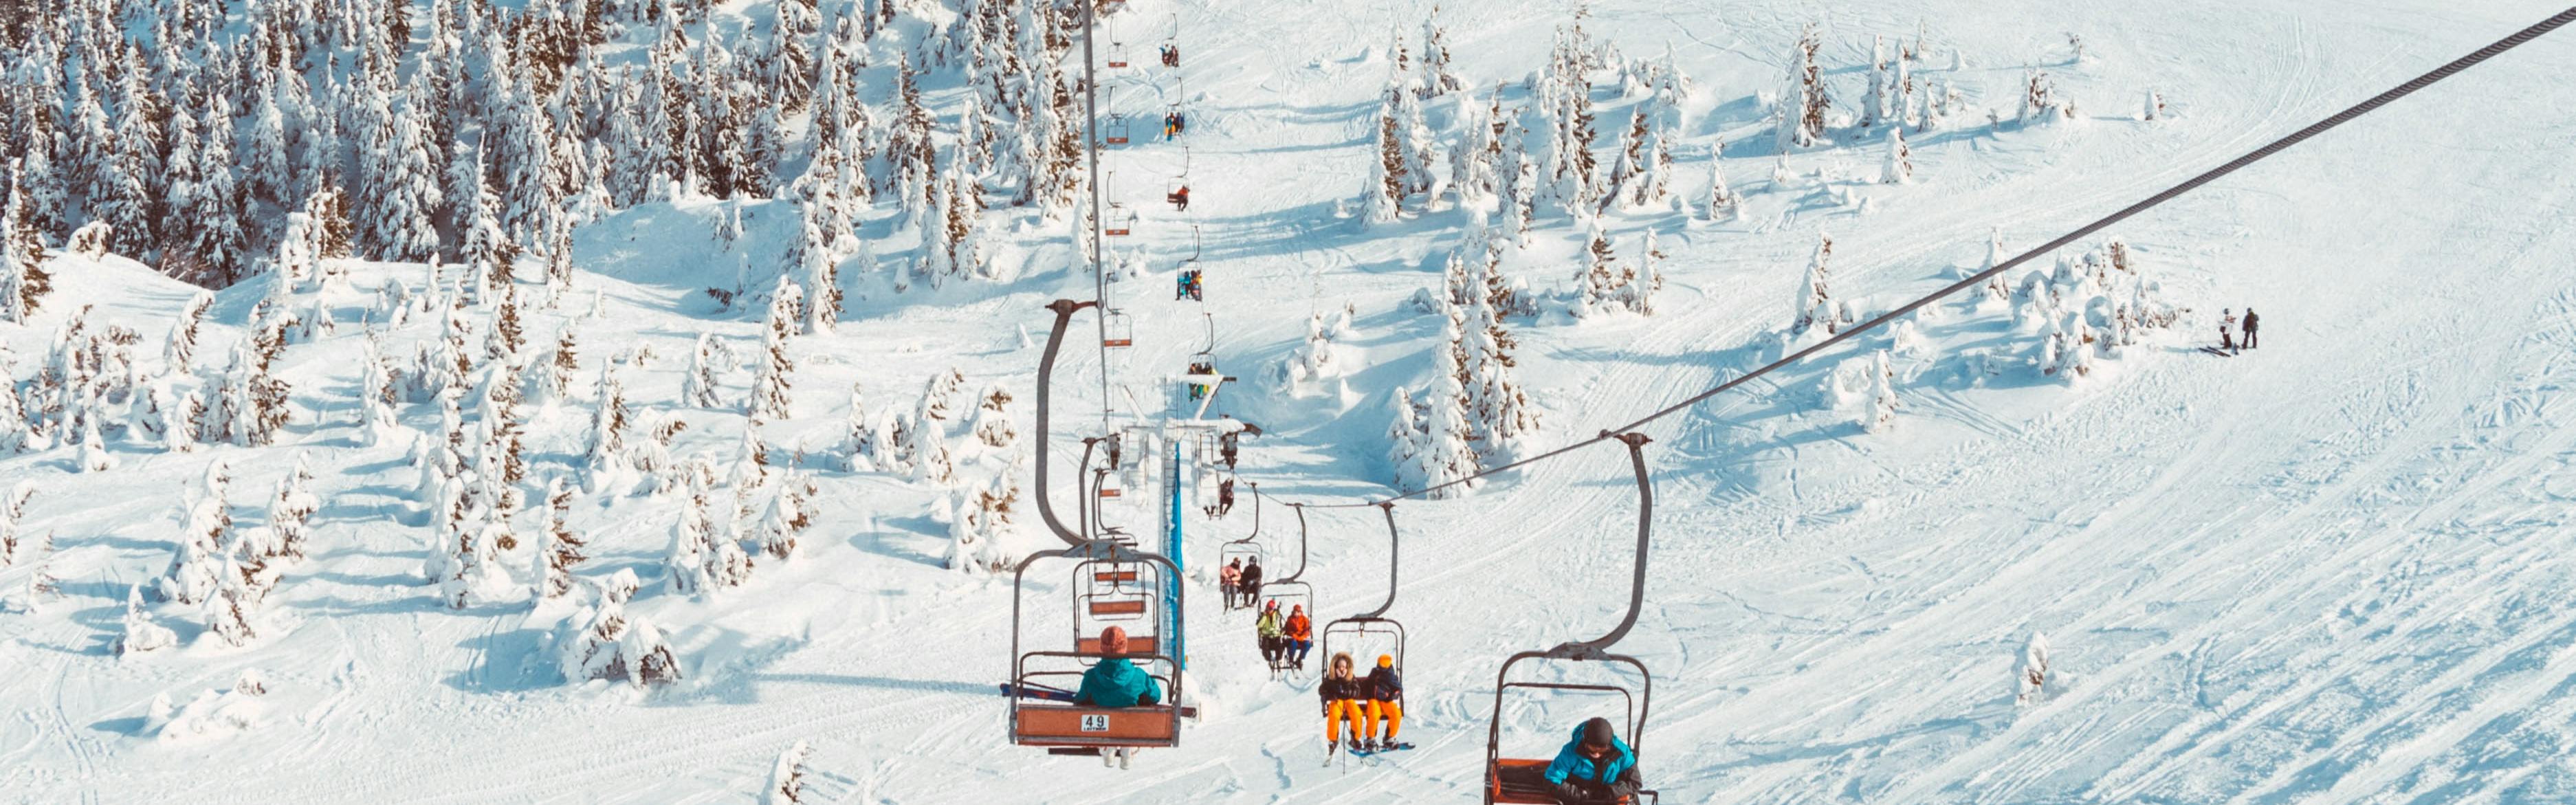 A ski lift with people riding up the mountain. You can see almost the whole lift and it looks pretty busy because there are people in every chair. There is a lot of snow on the ground.